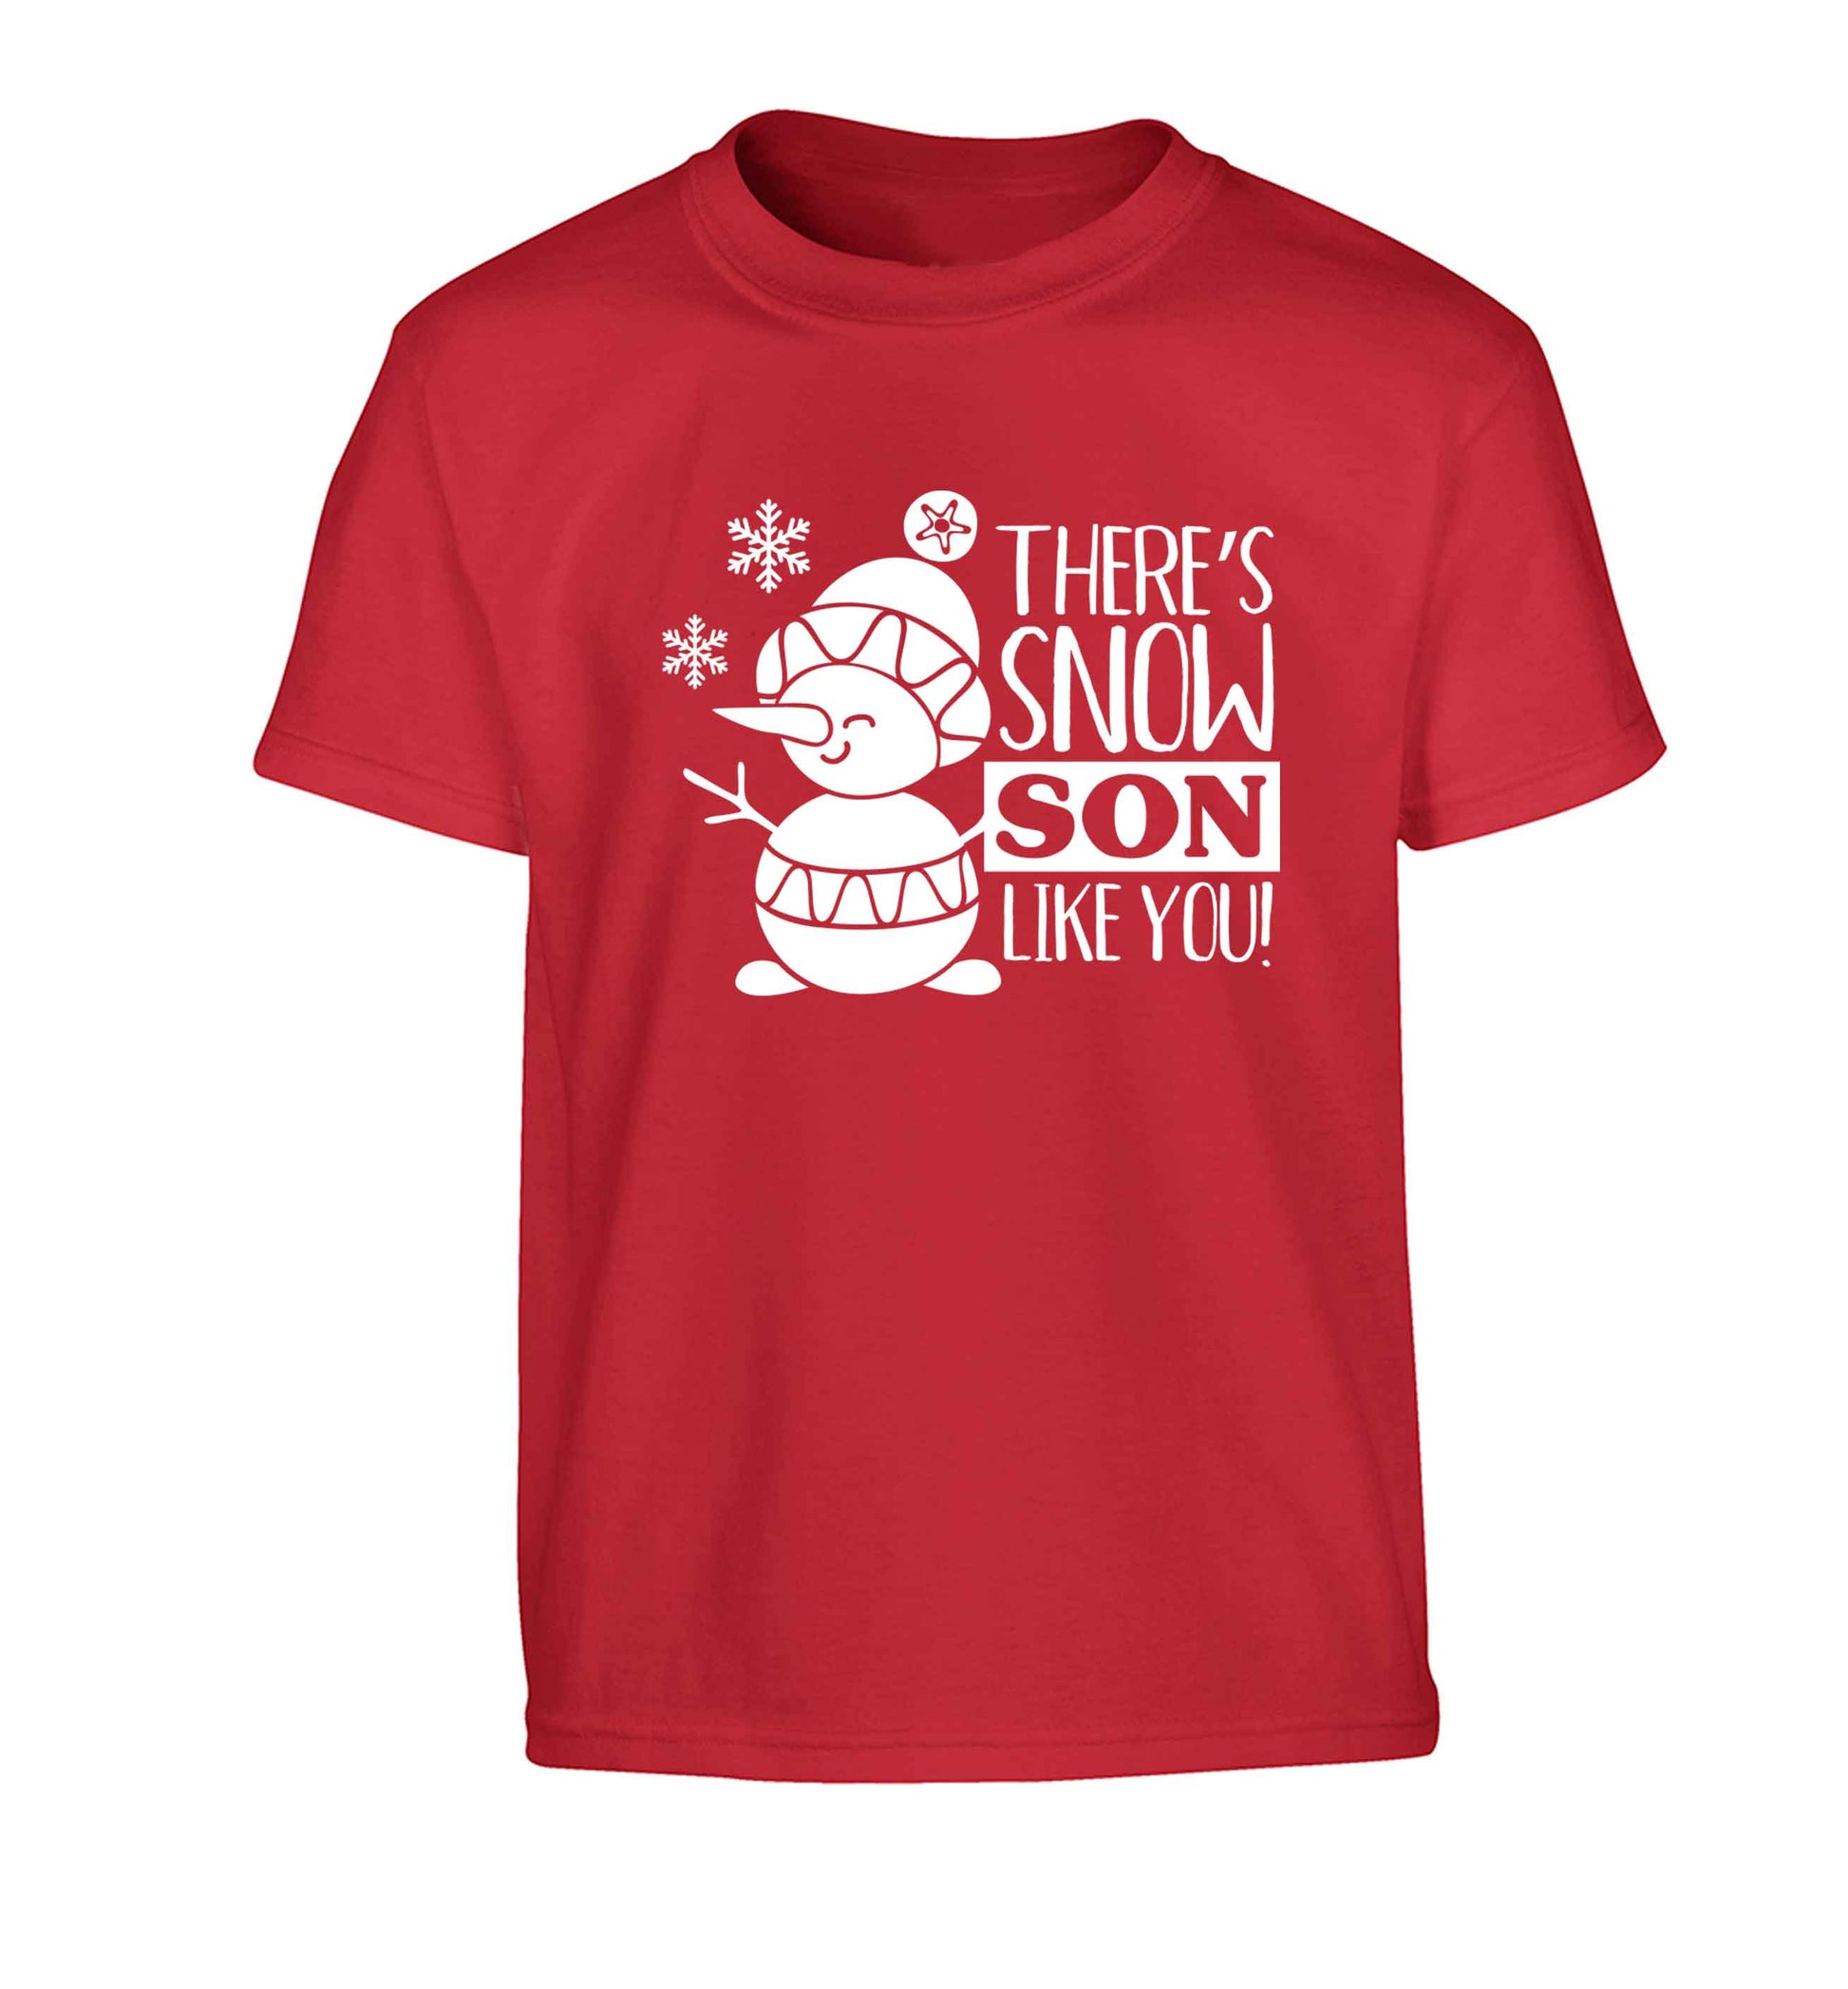 There's snow son like you Children's red Tshirt 12-13 Years